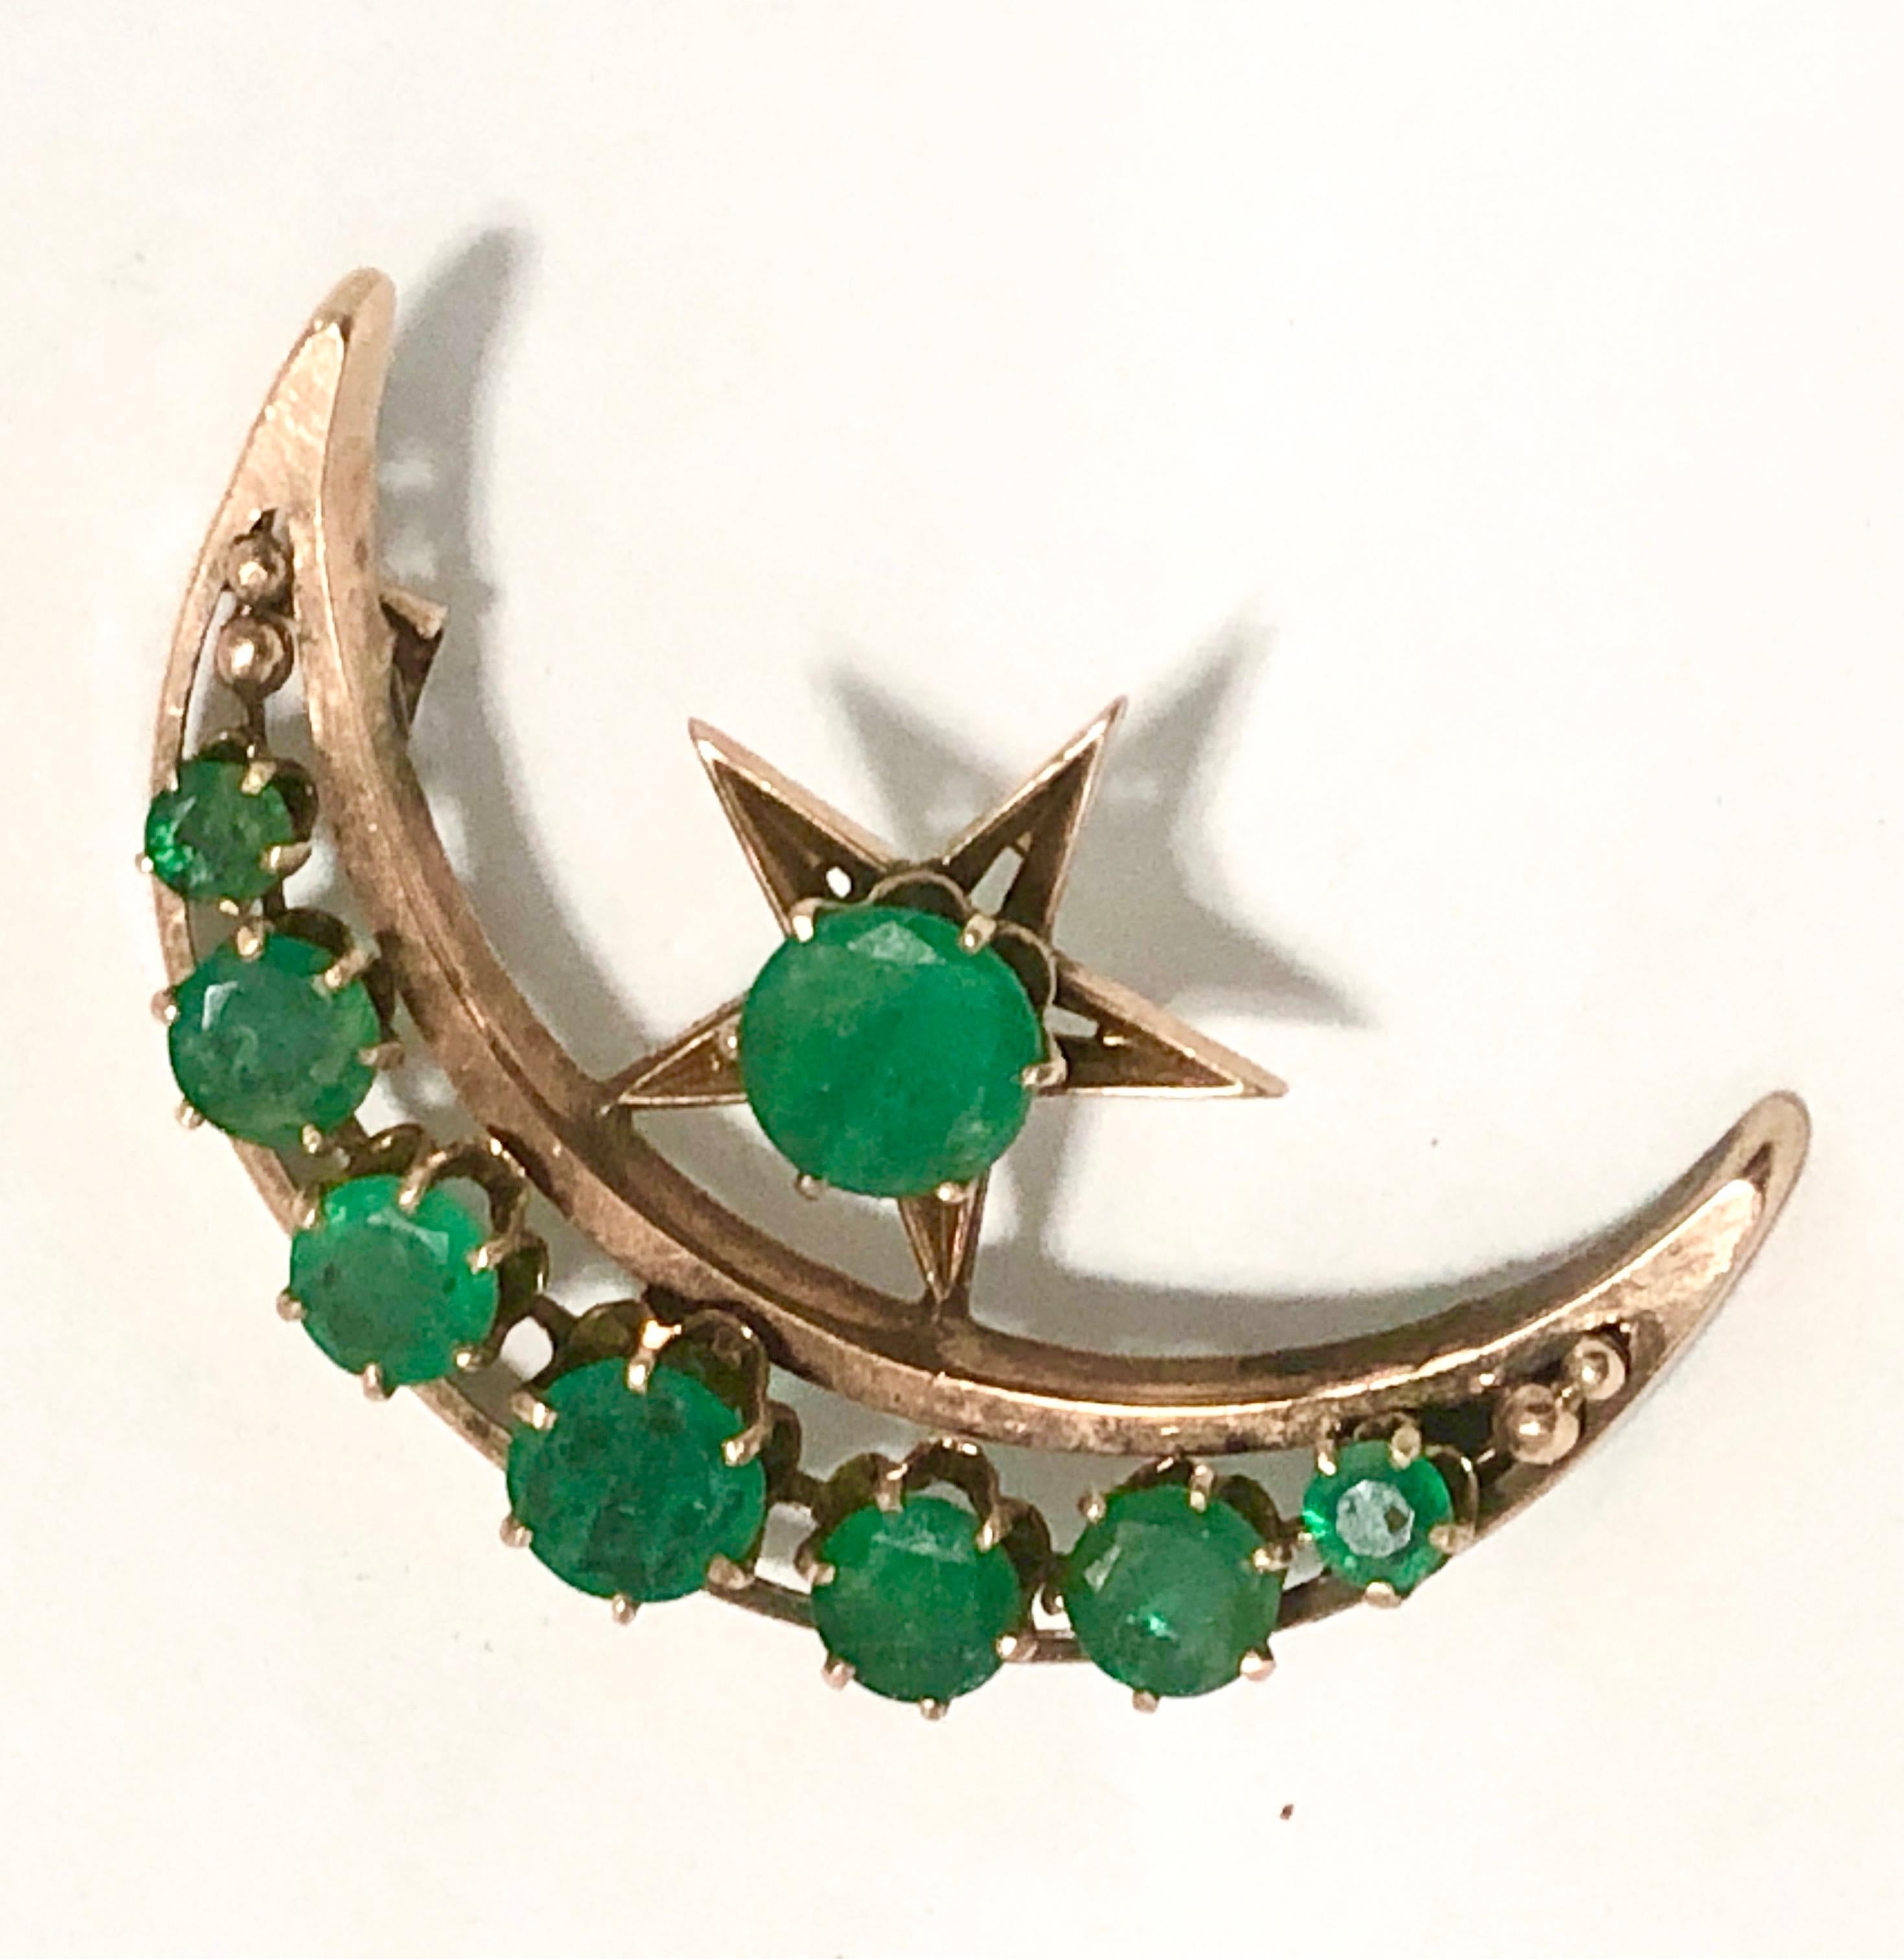 Spectacular emerald and 10k rose gold Victorian crescent pendant in the popular moon and star motif..  (Chain can be attached if you wish to your measurement.)

The pendant is approximately 1.5